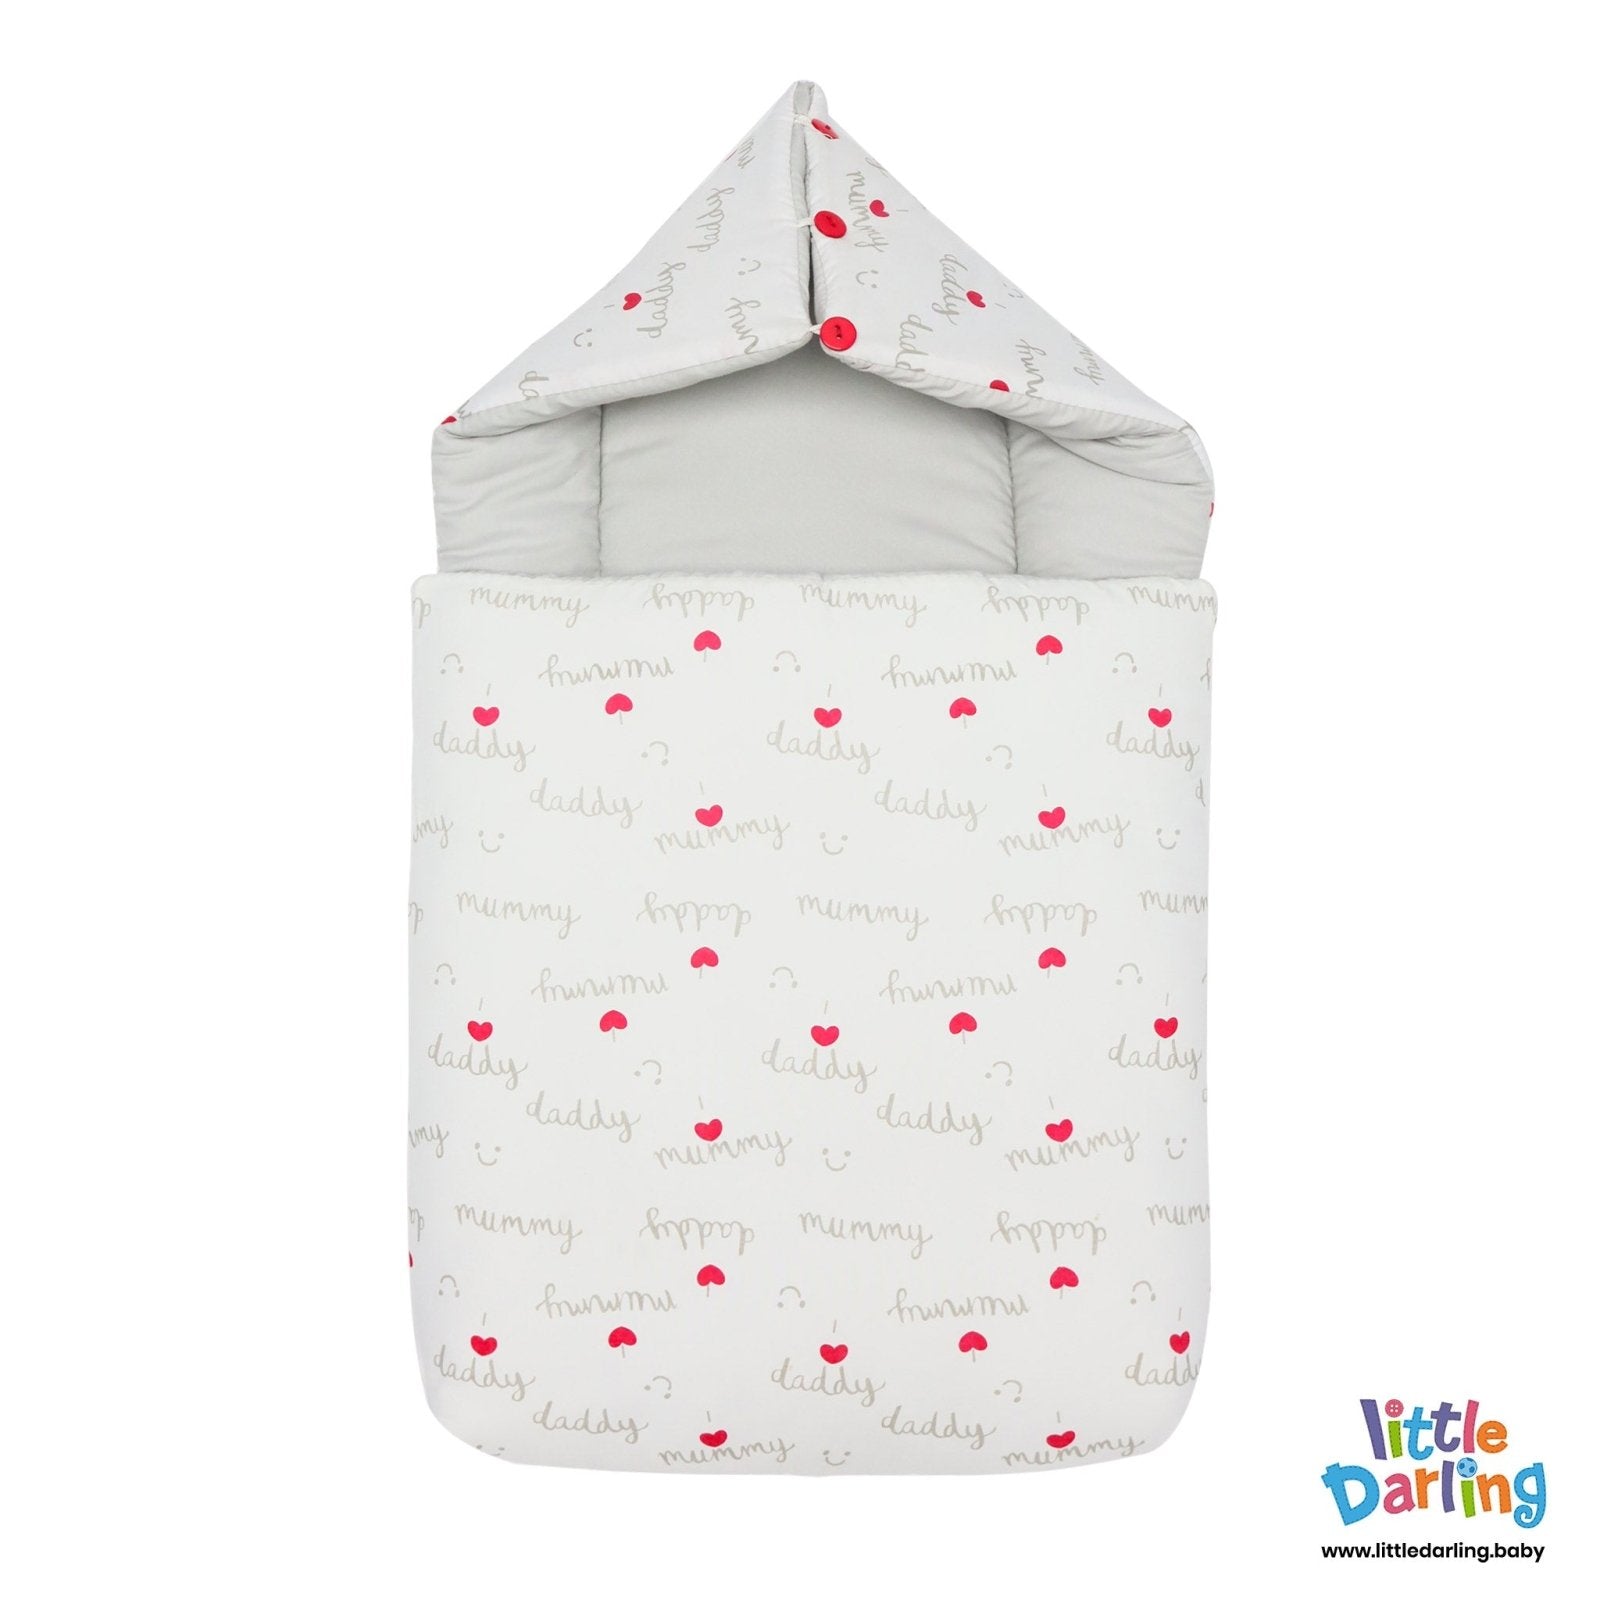 Hooded Baby Carry Nest With Pillow Mummy Daddy Print by Little Darling